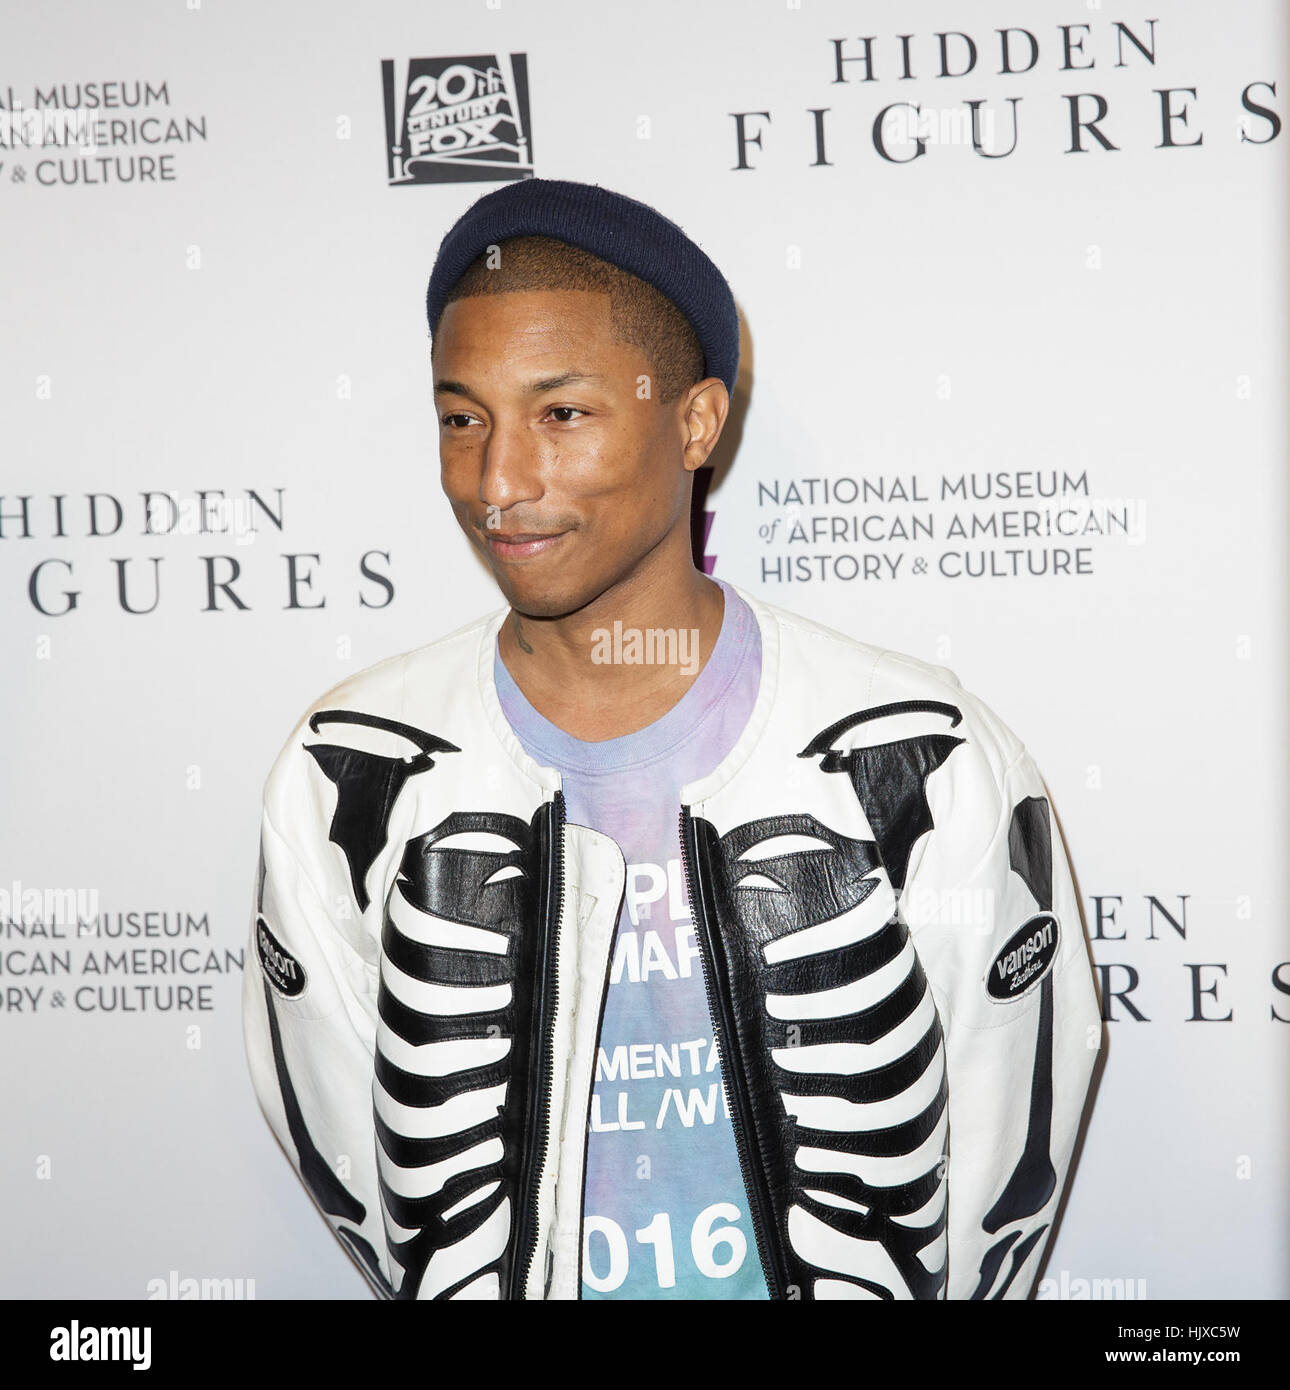 American singer-songwriter Pharrell Williams arrives on the red carpet for a screening of the film “Hidden Figures” at the Smithsonian’s National Museum of African American History and Culture, Wednesday, Dec. 14, 2016 in Washington DC. The film is based on the book of the same title, by Margot Lee Shetterly, and chronicles the lives of Katherine Johnson, Dorothy Vaughan and Mary Jackson -- African-American women working at NASA as “human computers,” who were critical to the success of John Glenn’s Friendship 7 mission in 1962. Stock Photo